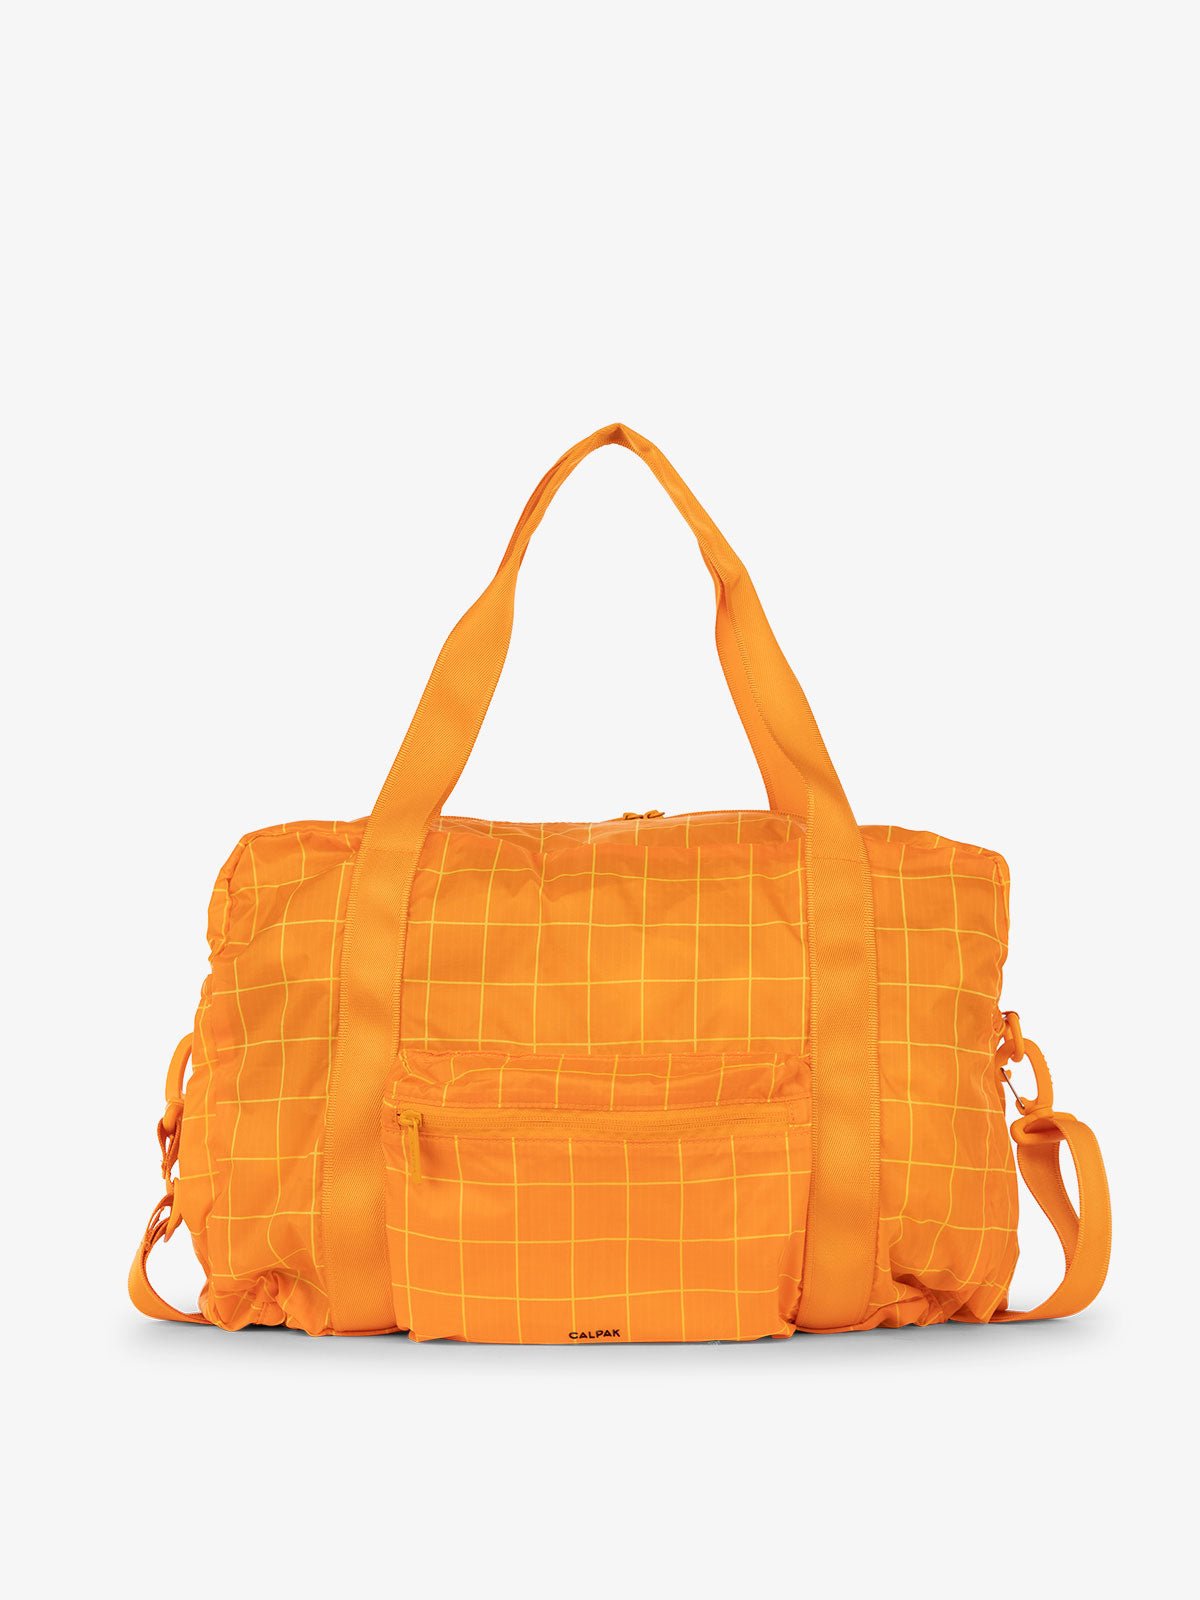 CALPAK Compakt duffel bag with removable crossbody strap and water resistant fabric in orange grid